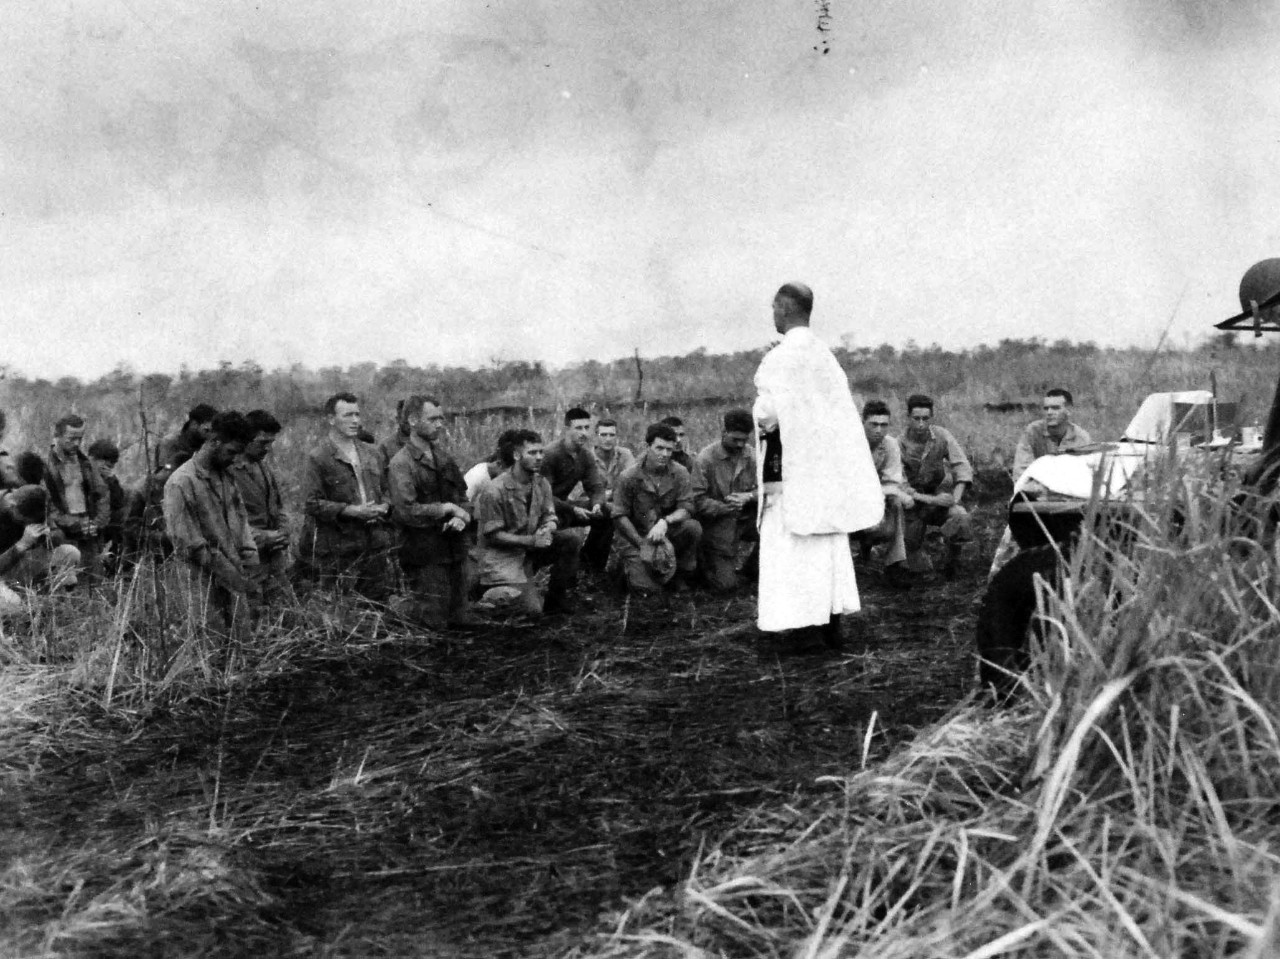 127-GW-983-69000:  Battle of Cape Gloucester, New Britain, December 1943-January 1944.  Marines kneel to worship God in the wilds of New Britain.  They were with the Marines that invaded Cape Gloucester the day after Christmas.  The altar is a jeep and there are bomb craters in the fields behind them, 26 December 1944.  Official U.S. Marine Corps Photograph, now in the collections of the National Archives.   (2014/7/9).